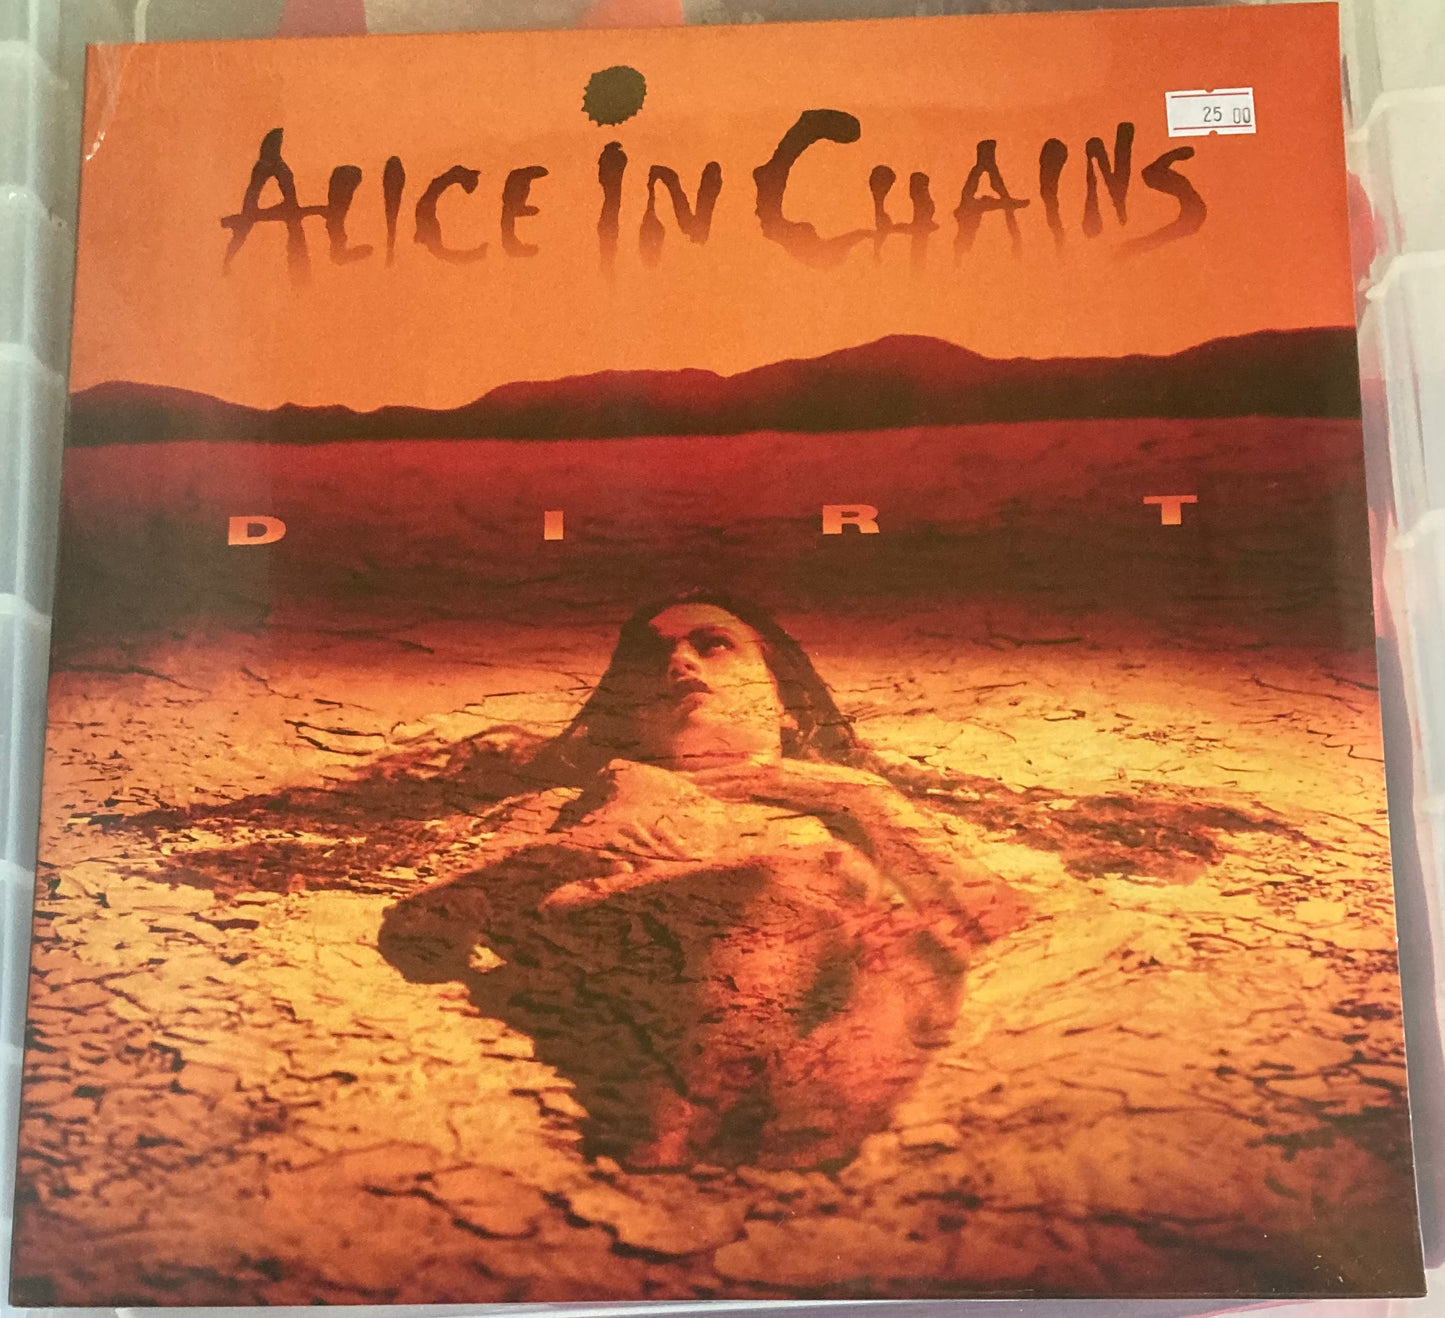 The front of 'Alice in Chains - Dirt' on vinyl